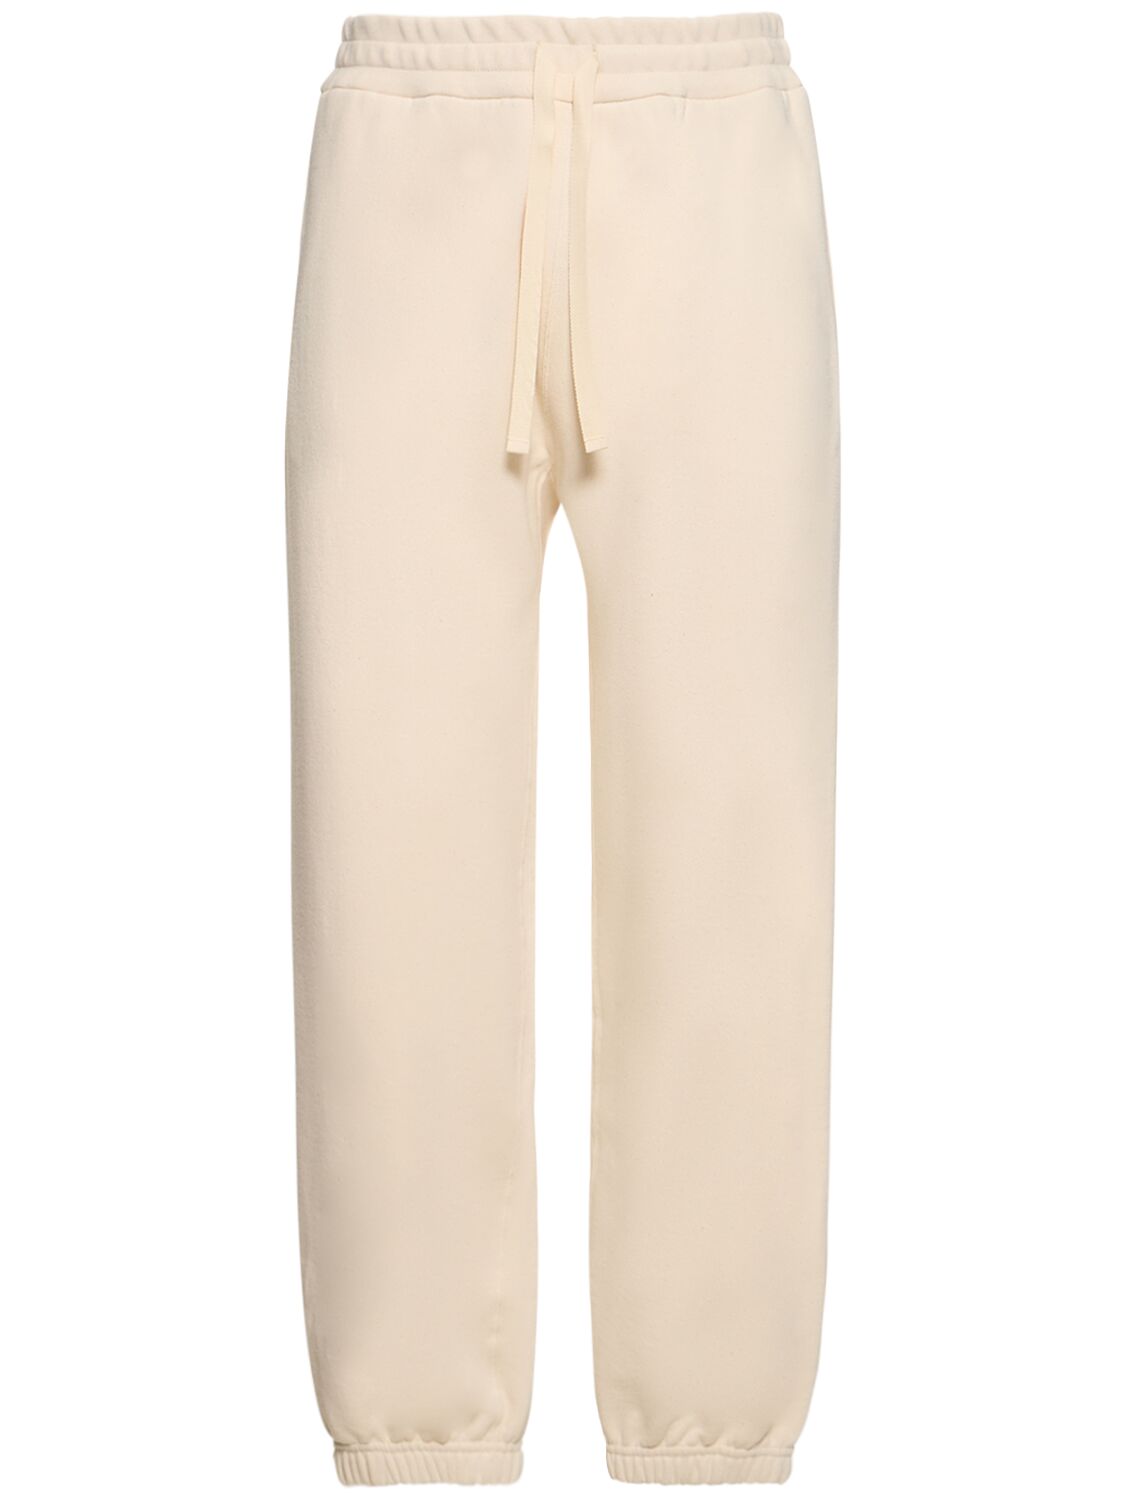 Image of Compact Cotton Terry Sweatpants